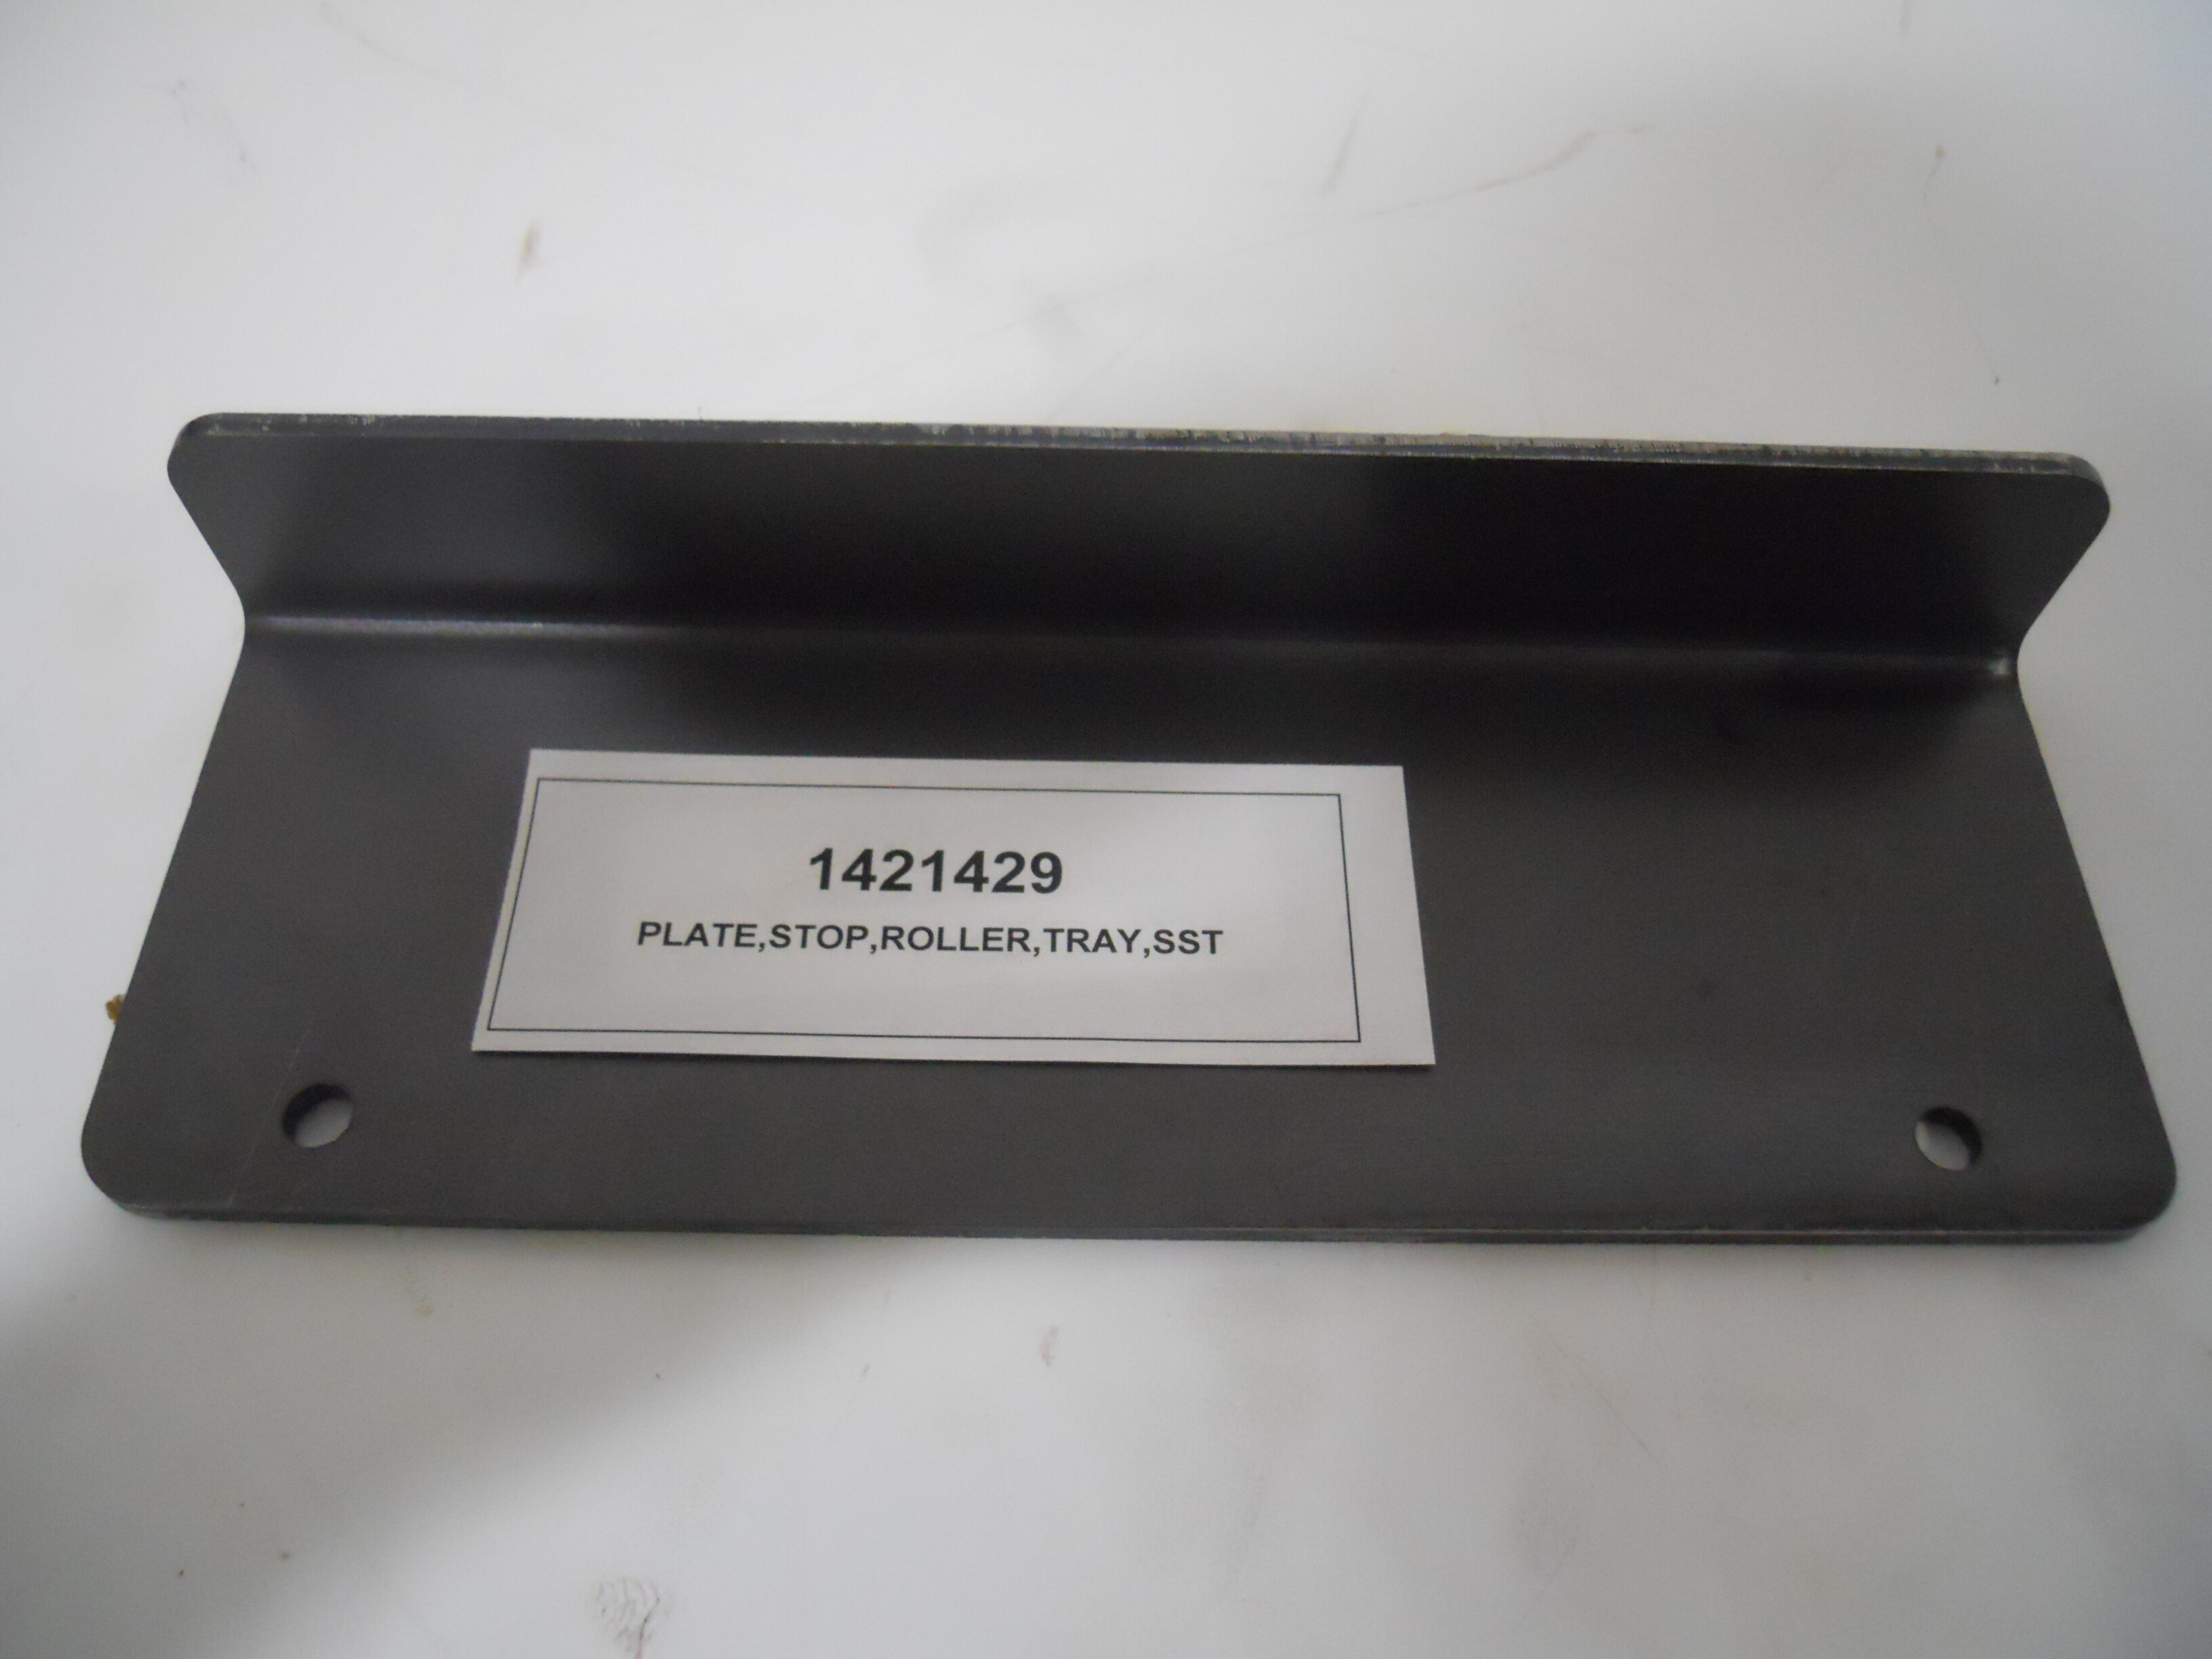 PLATE,STOP,ROLLER,TRAY,SST